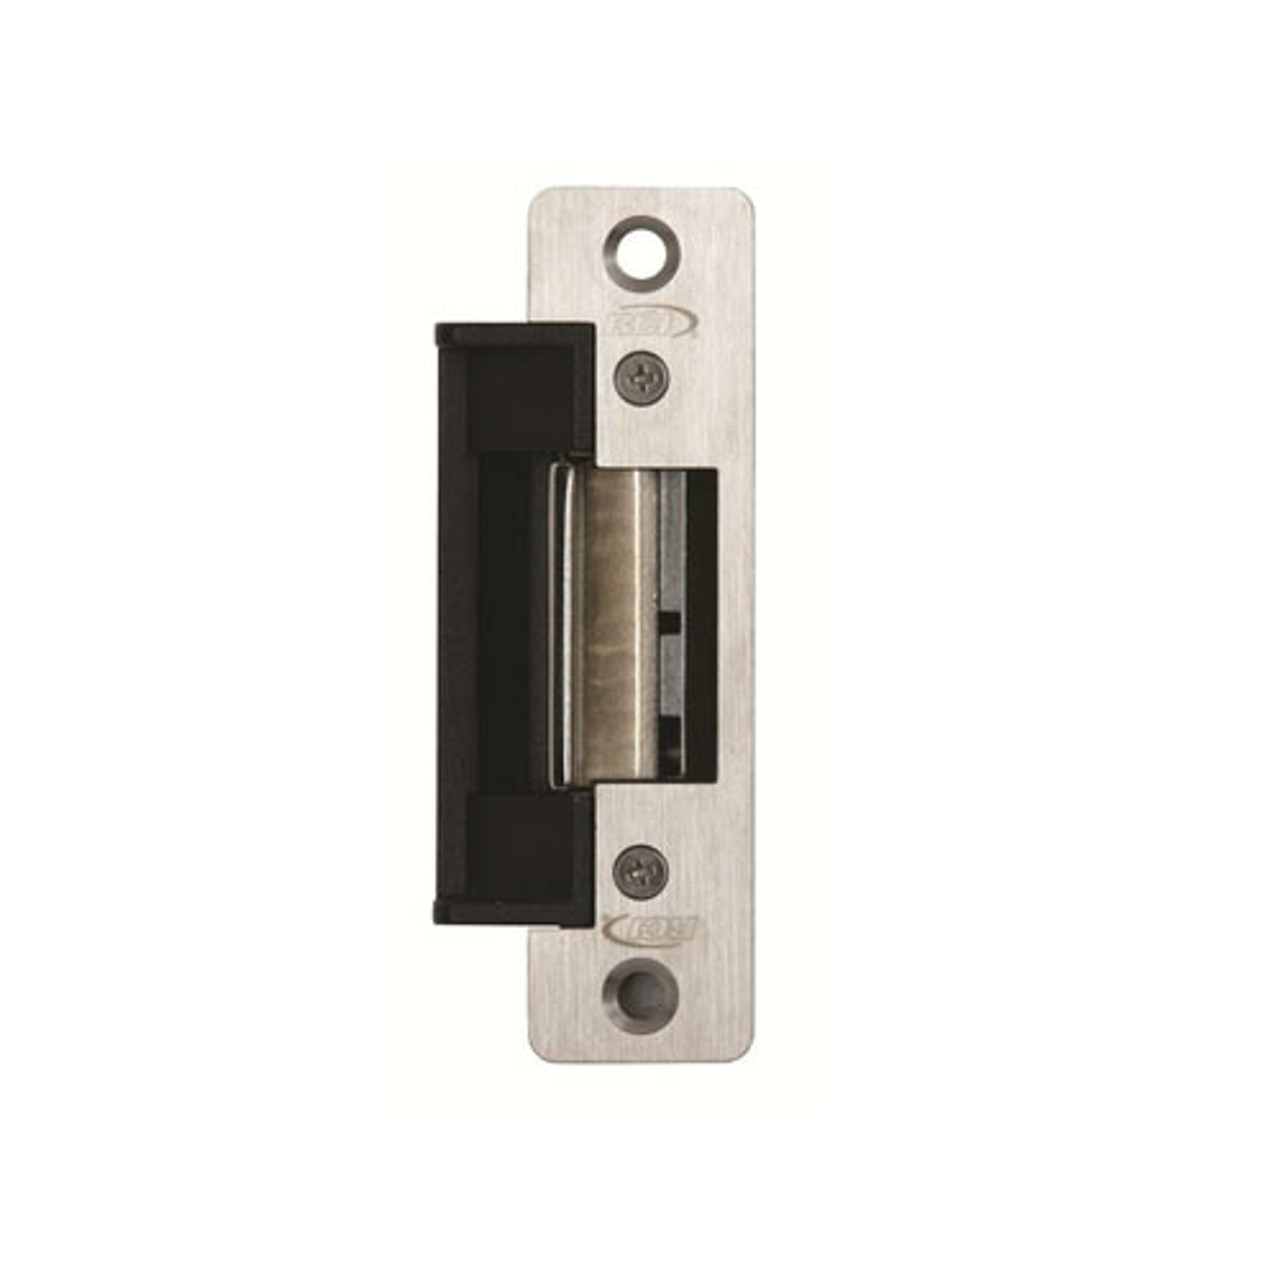 4304-06-32D RCI 4 Series Commercial Duty Electric Strike for ANSI Centerline Latch Entry in Brushed Stainless Steel Finish